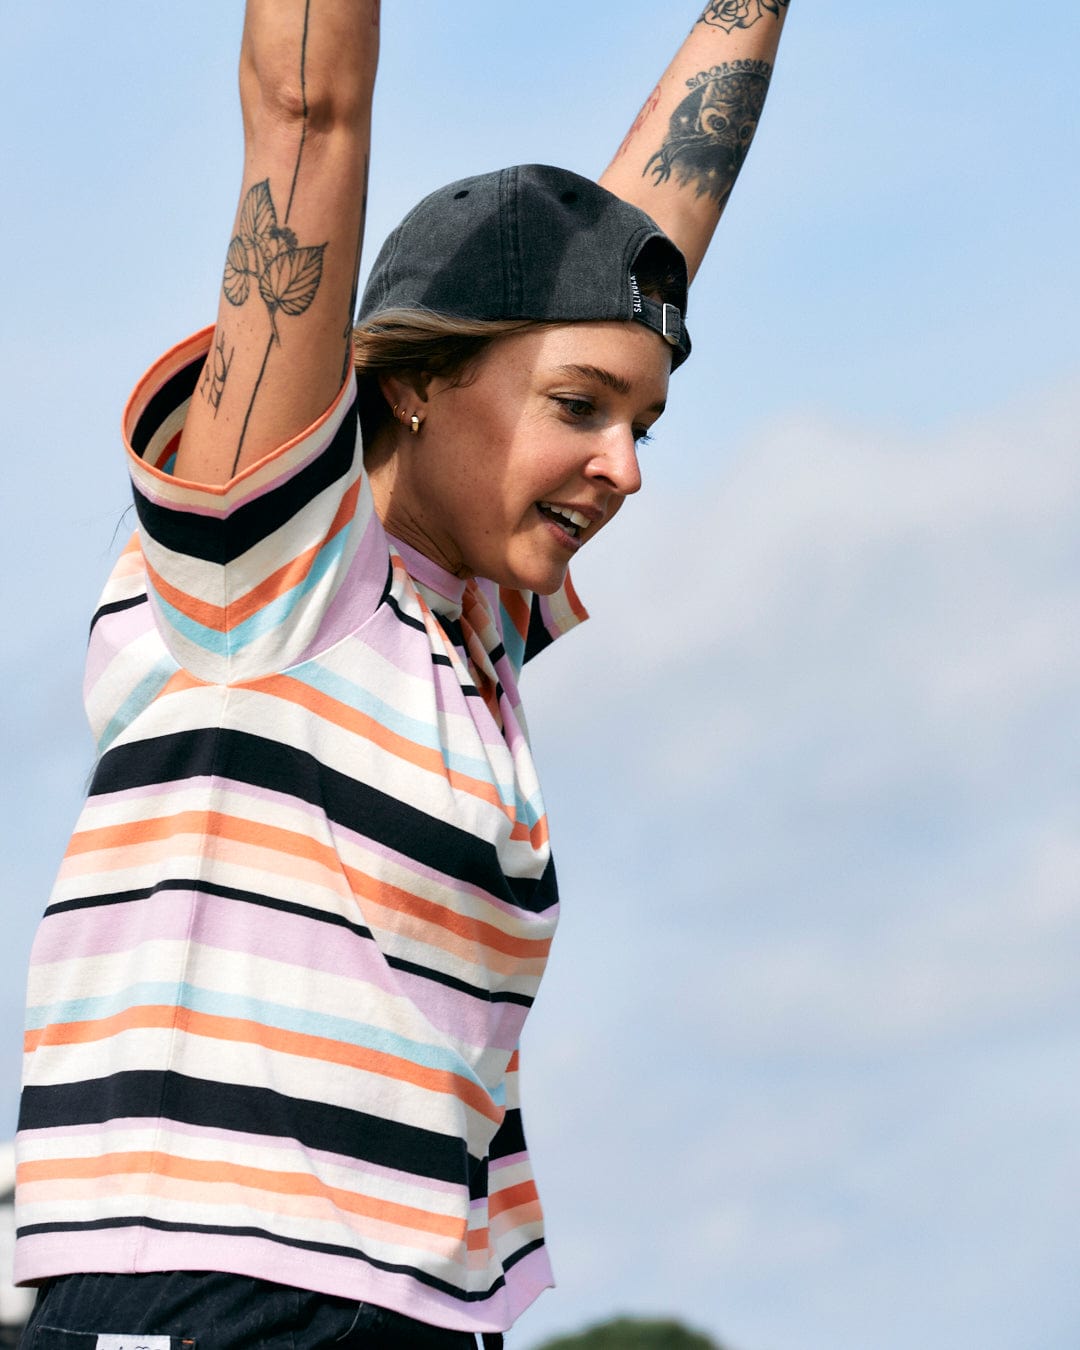 Woman with tattoos raising her arms in the air while wearing a Saltrock Juno - Womens Short Sleeve T-Shirt - Multi with embroidery and a cap.